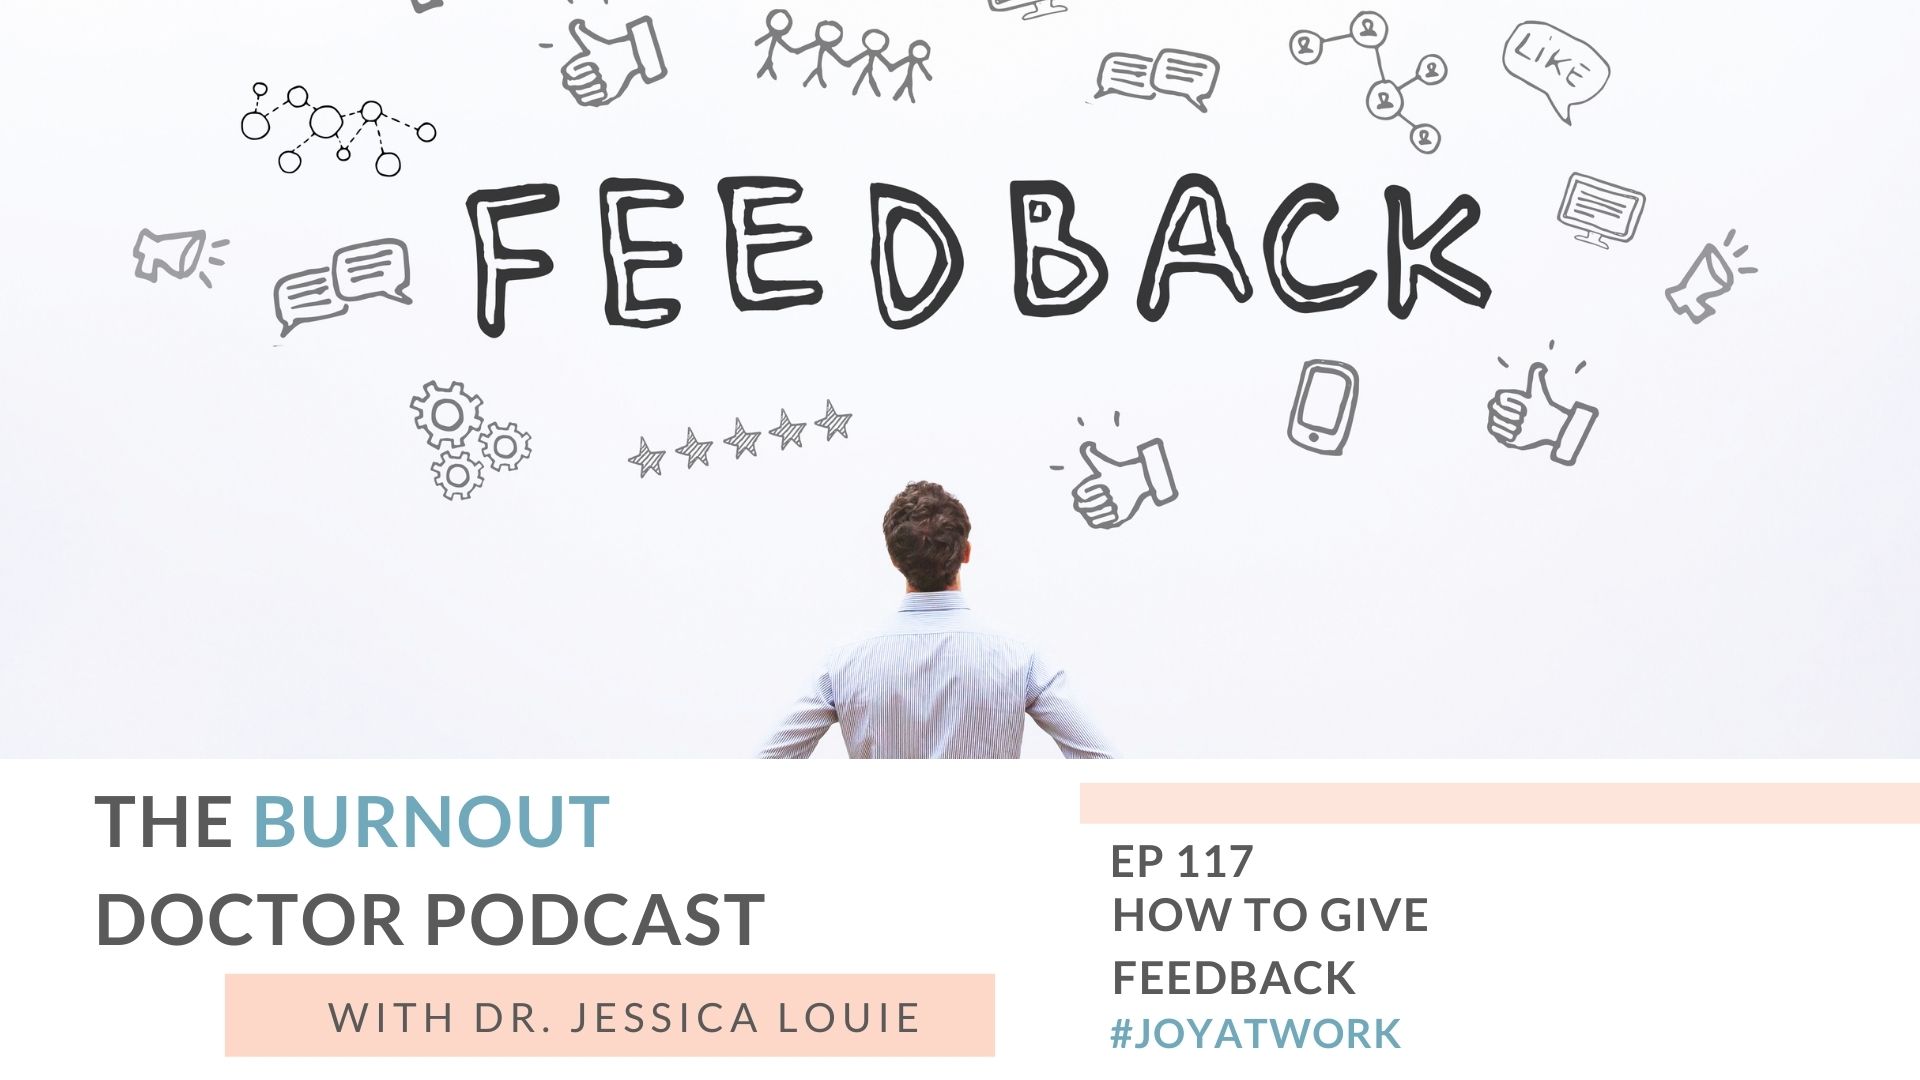 How to give meaningful constructive feedback with the FBI method by Barry Chapman. Pharmacist burnout help. The Burnout Doctor Podcast with Dr. Jessica Louie.